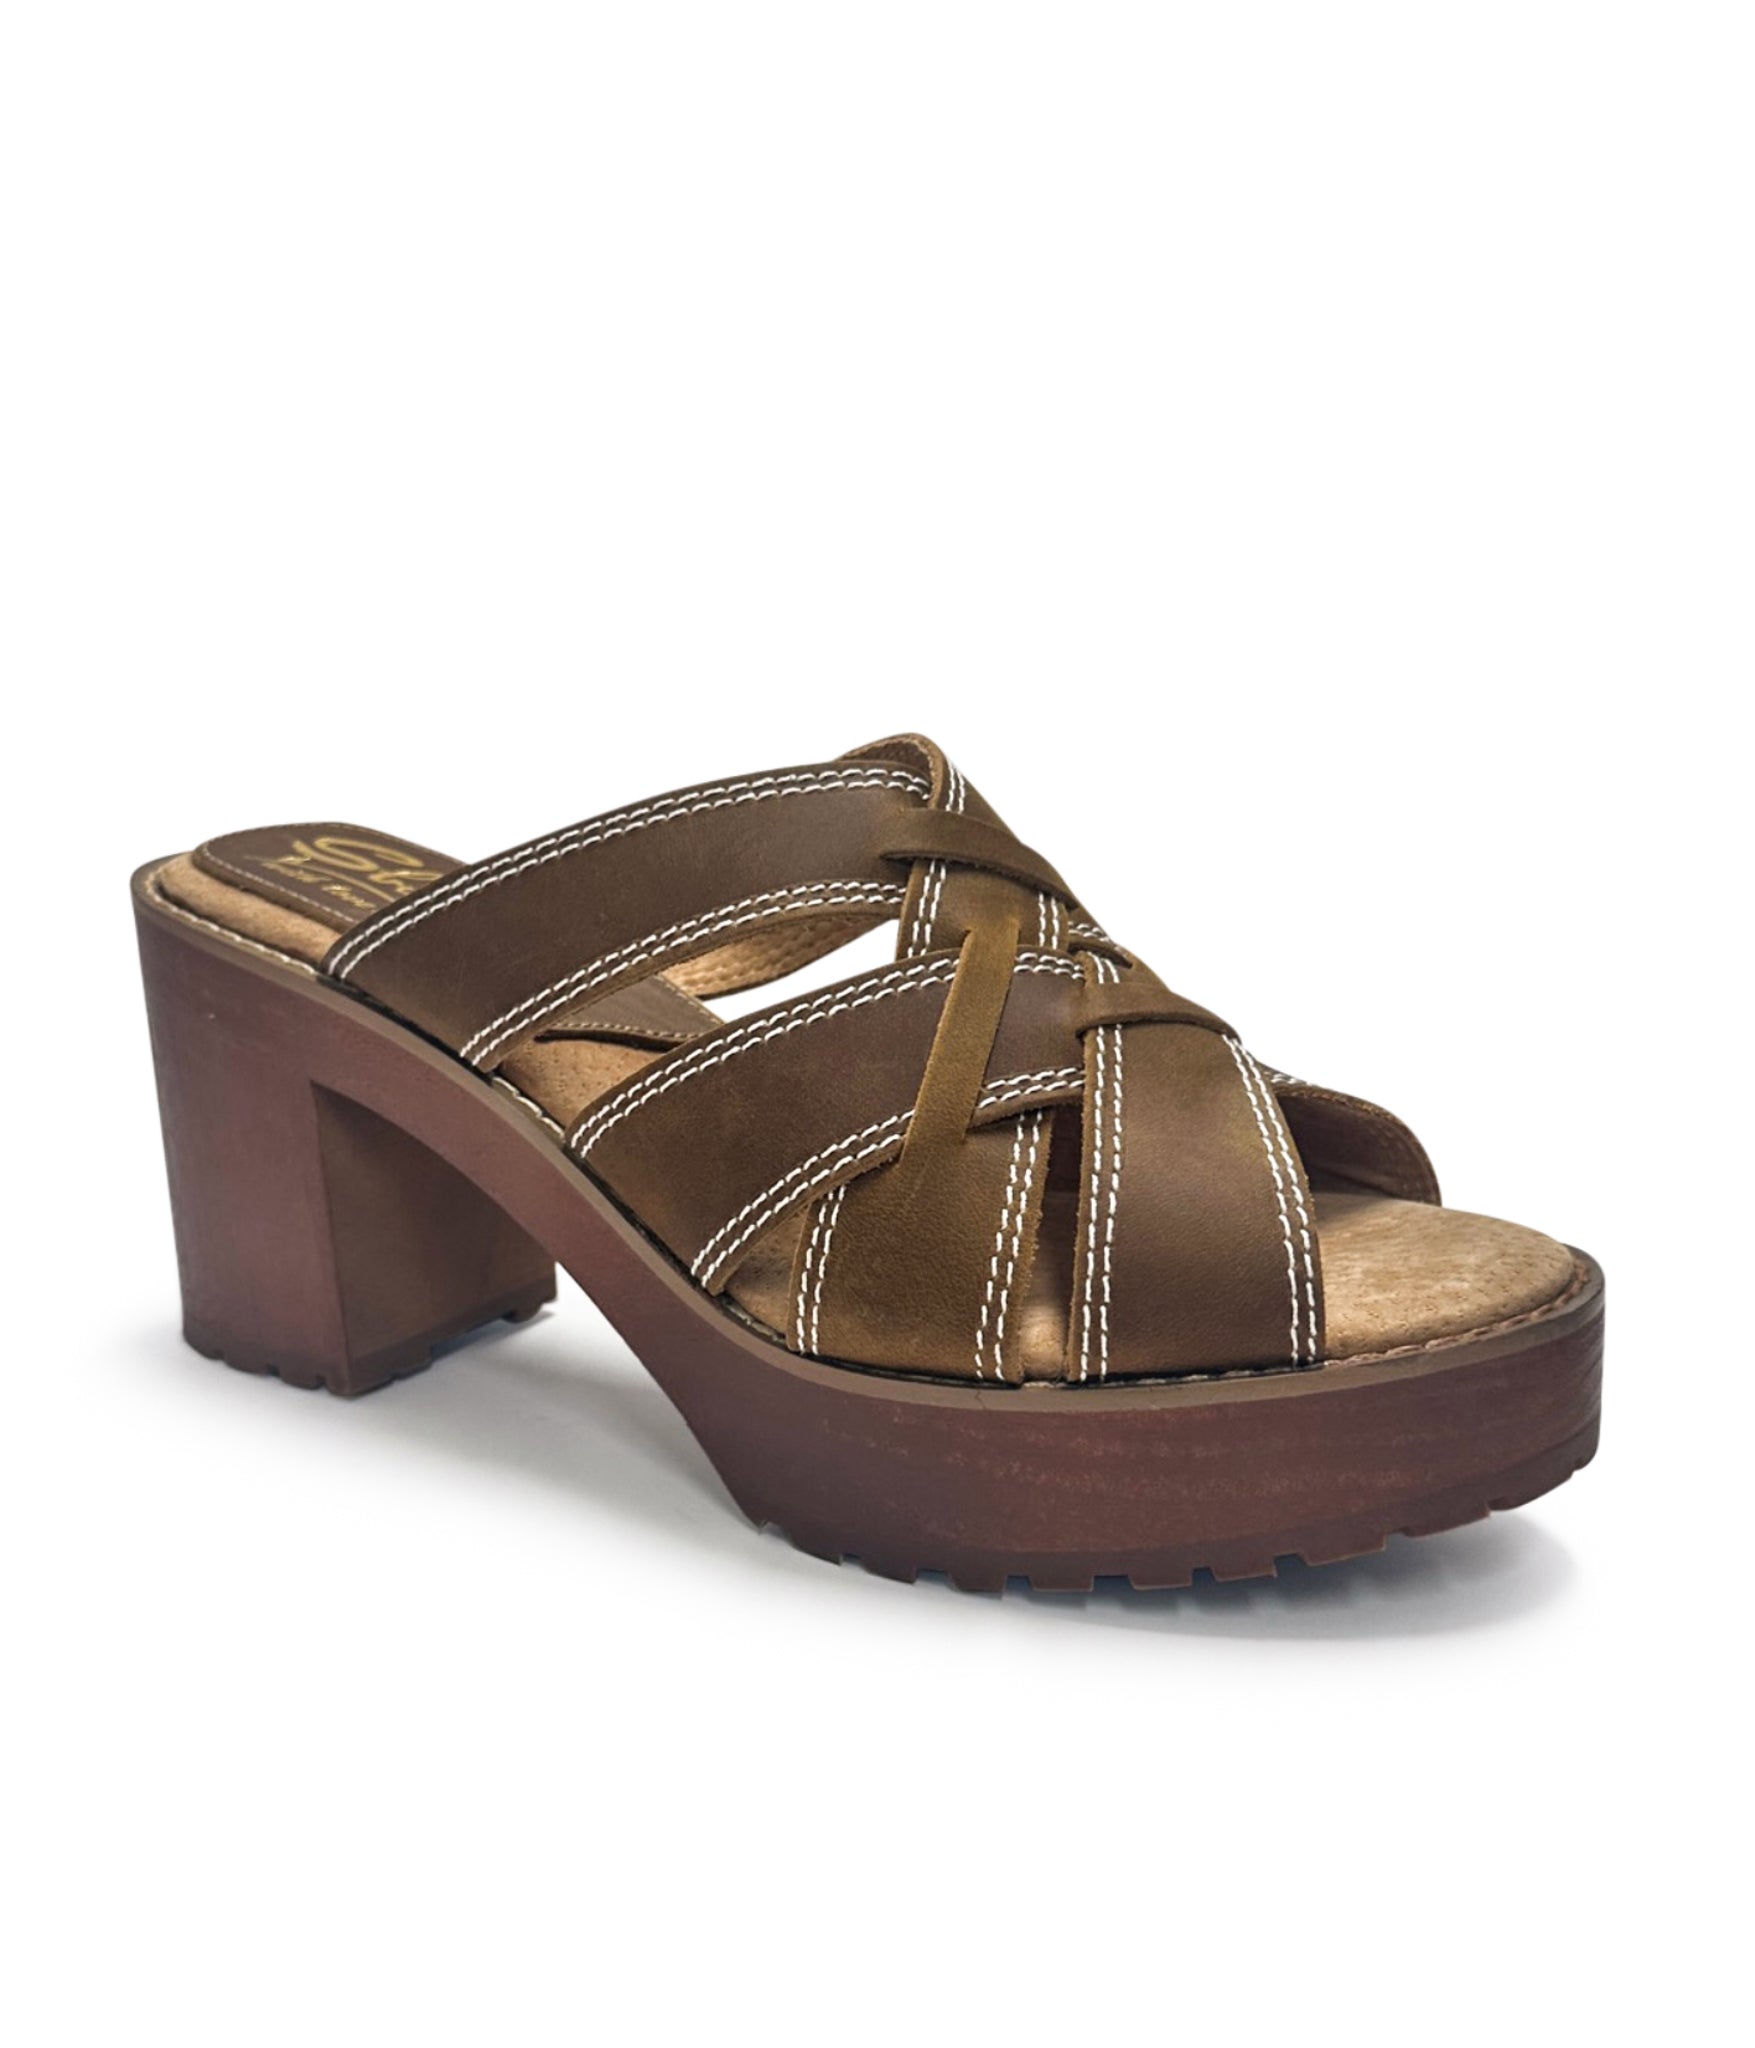 Norwood Suede Heeled Sandals in Chocolate